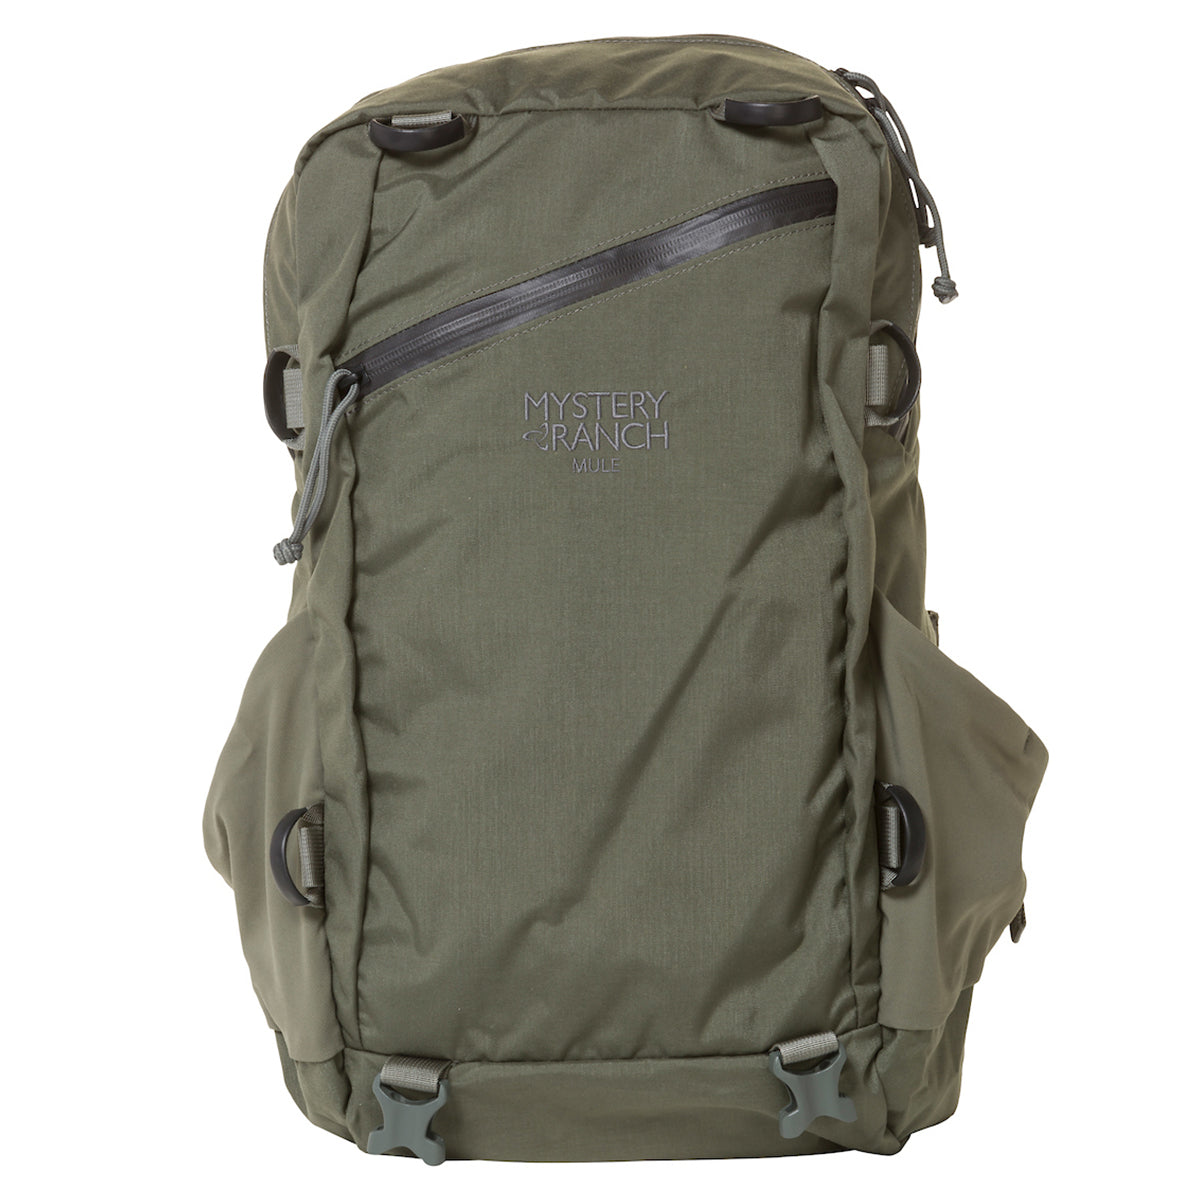 Mystery Ranch Mule Bag Only in Mystery Ranch Mule Bag Only (2020) by Mystery Ranch | Gear - goHUNT Shop by GOHUNT | Mystery Ranch - GOHUNT Shop